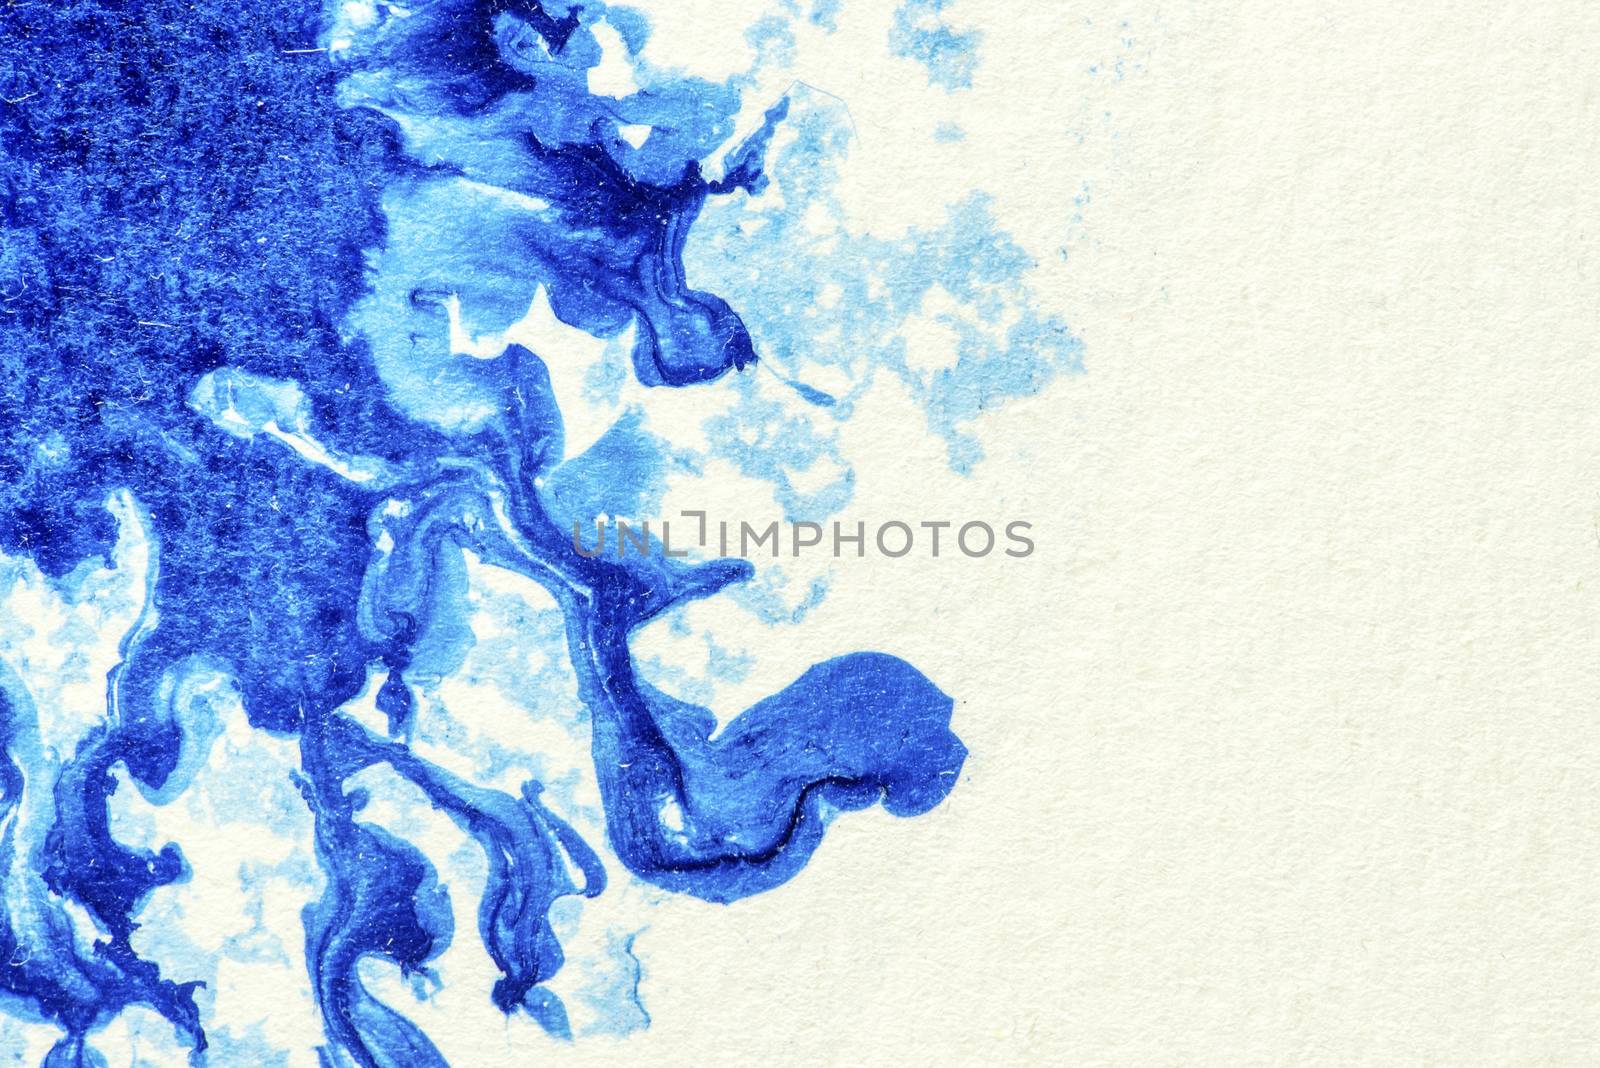 Watercolor art grunge texture backdrop abstract background by Vanzyst